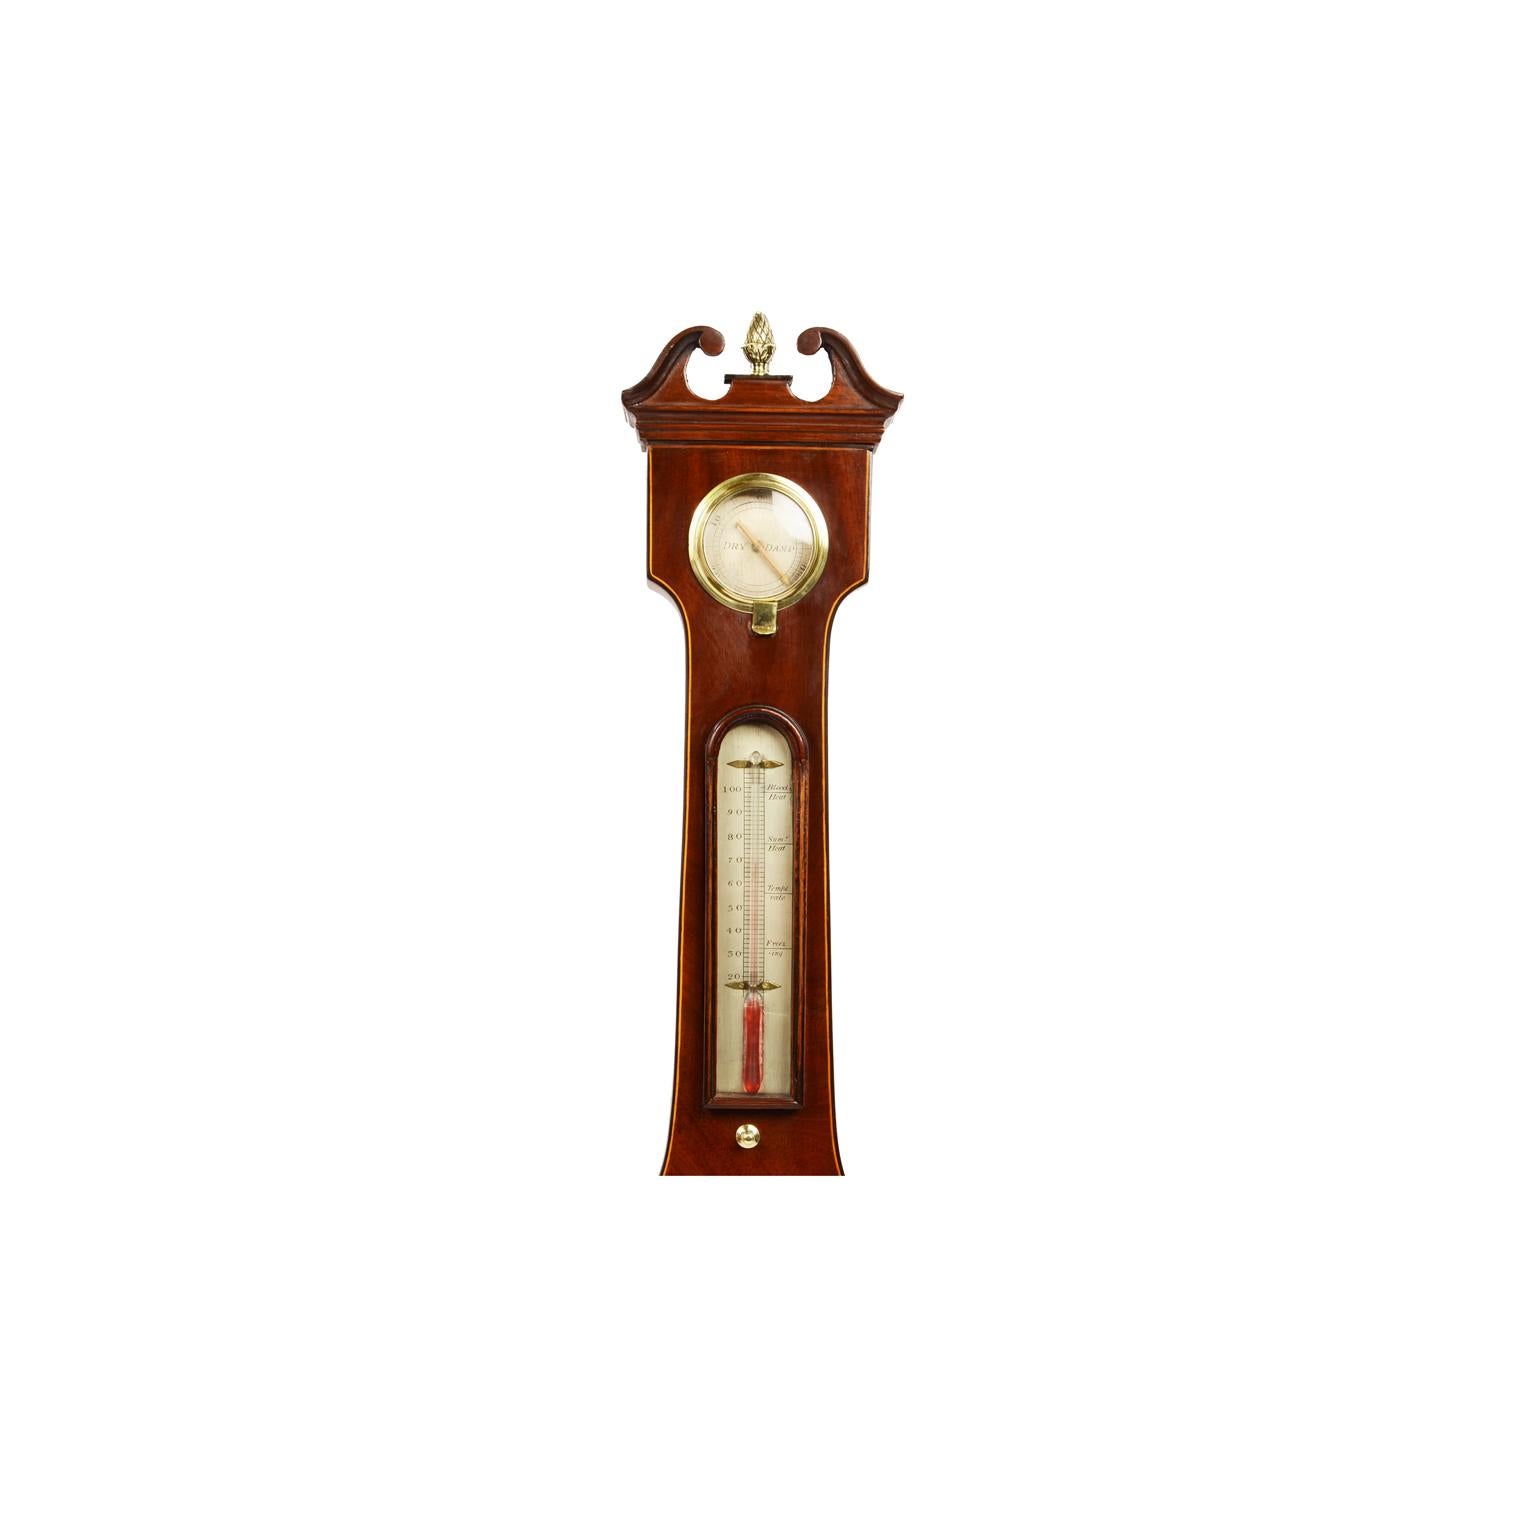 Barometer signed Joseph Solcha Hull Warranted, active between 1851 and 1855, antique measuring instrument made of mahogany wood, with cedar wood thread on the outer edge. Silver-plated brass dial engraved with weather indications. The barometer